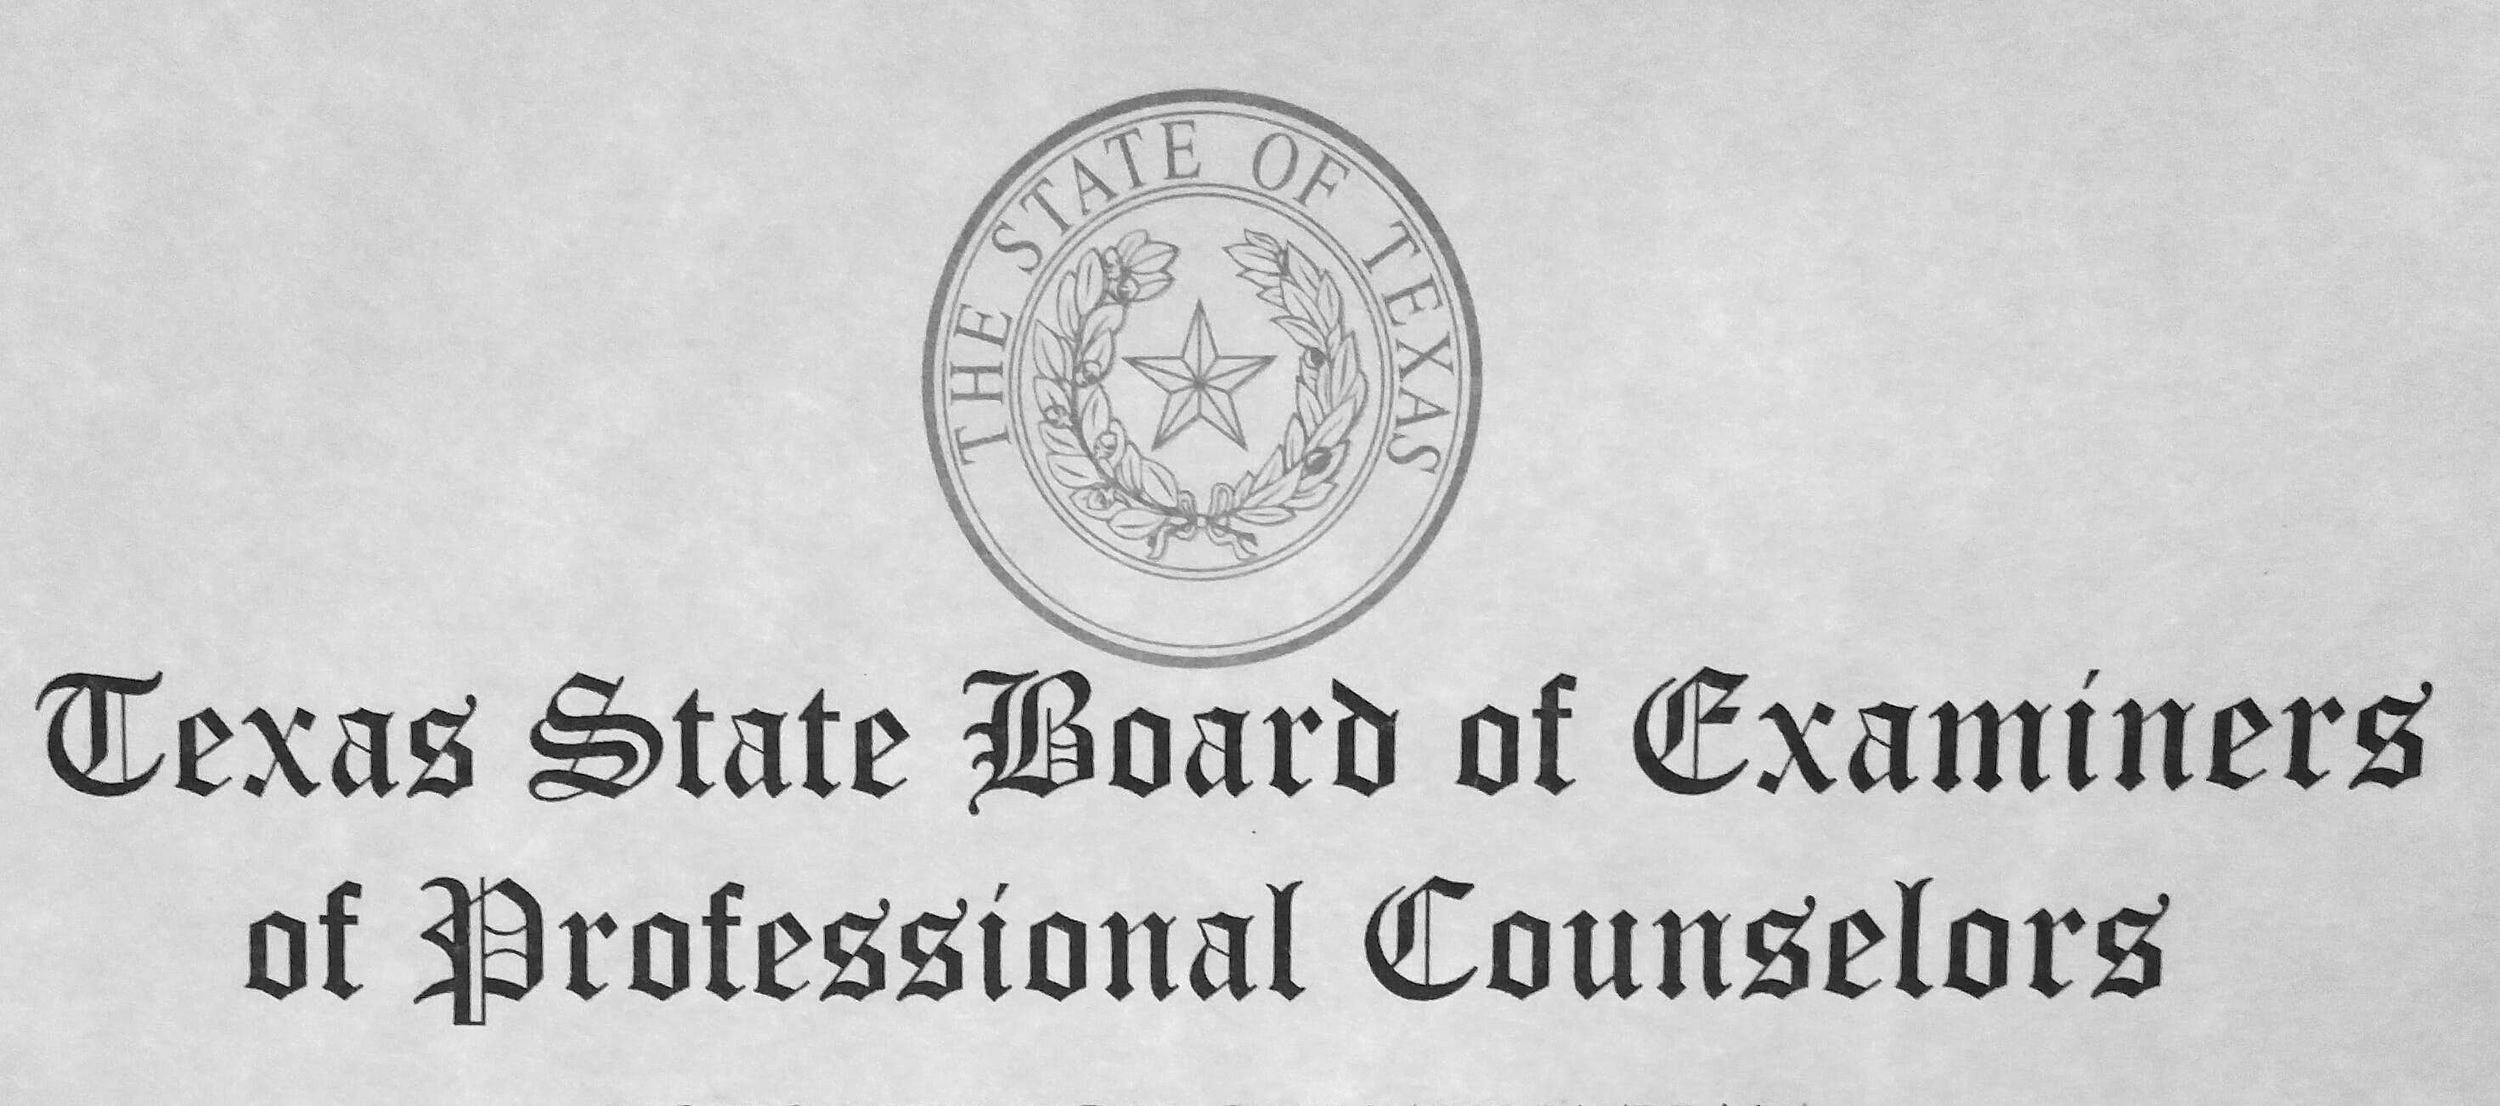 Venture Counseling_Texas State Board of Examiners of Professional Counselors .jpg